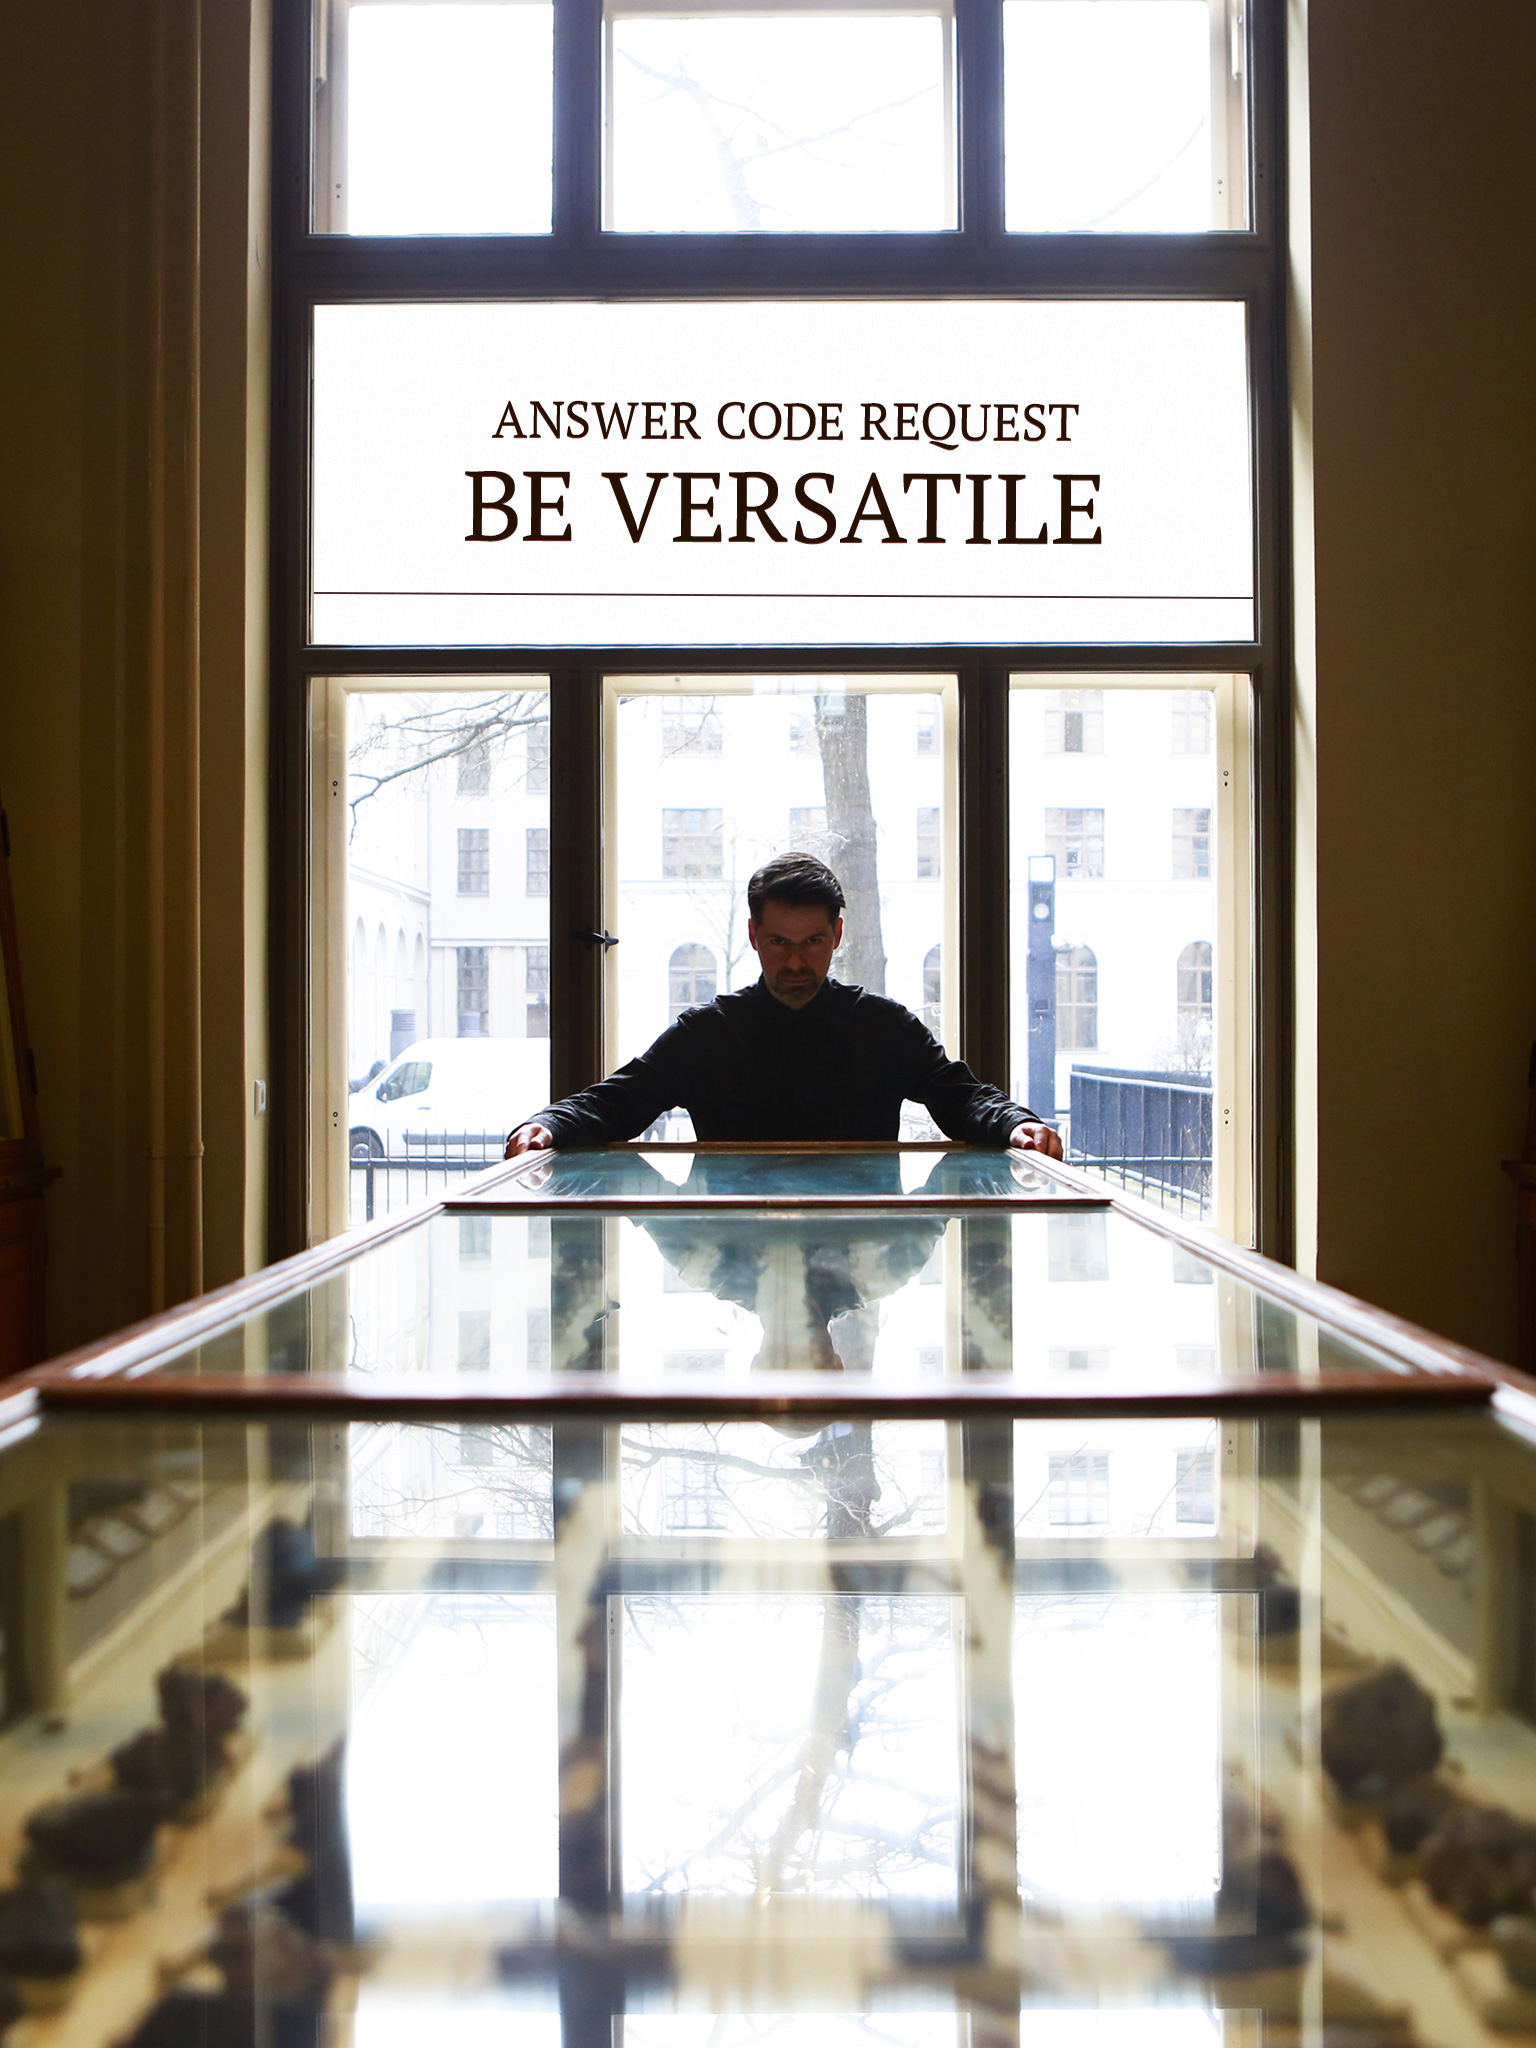 Answer Code Request: Be versatile